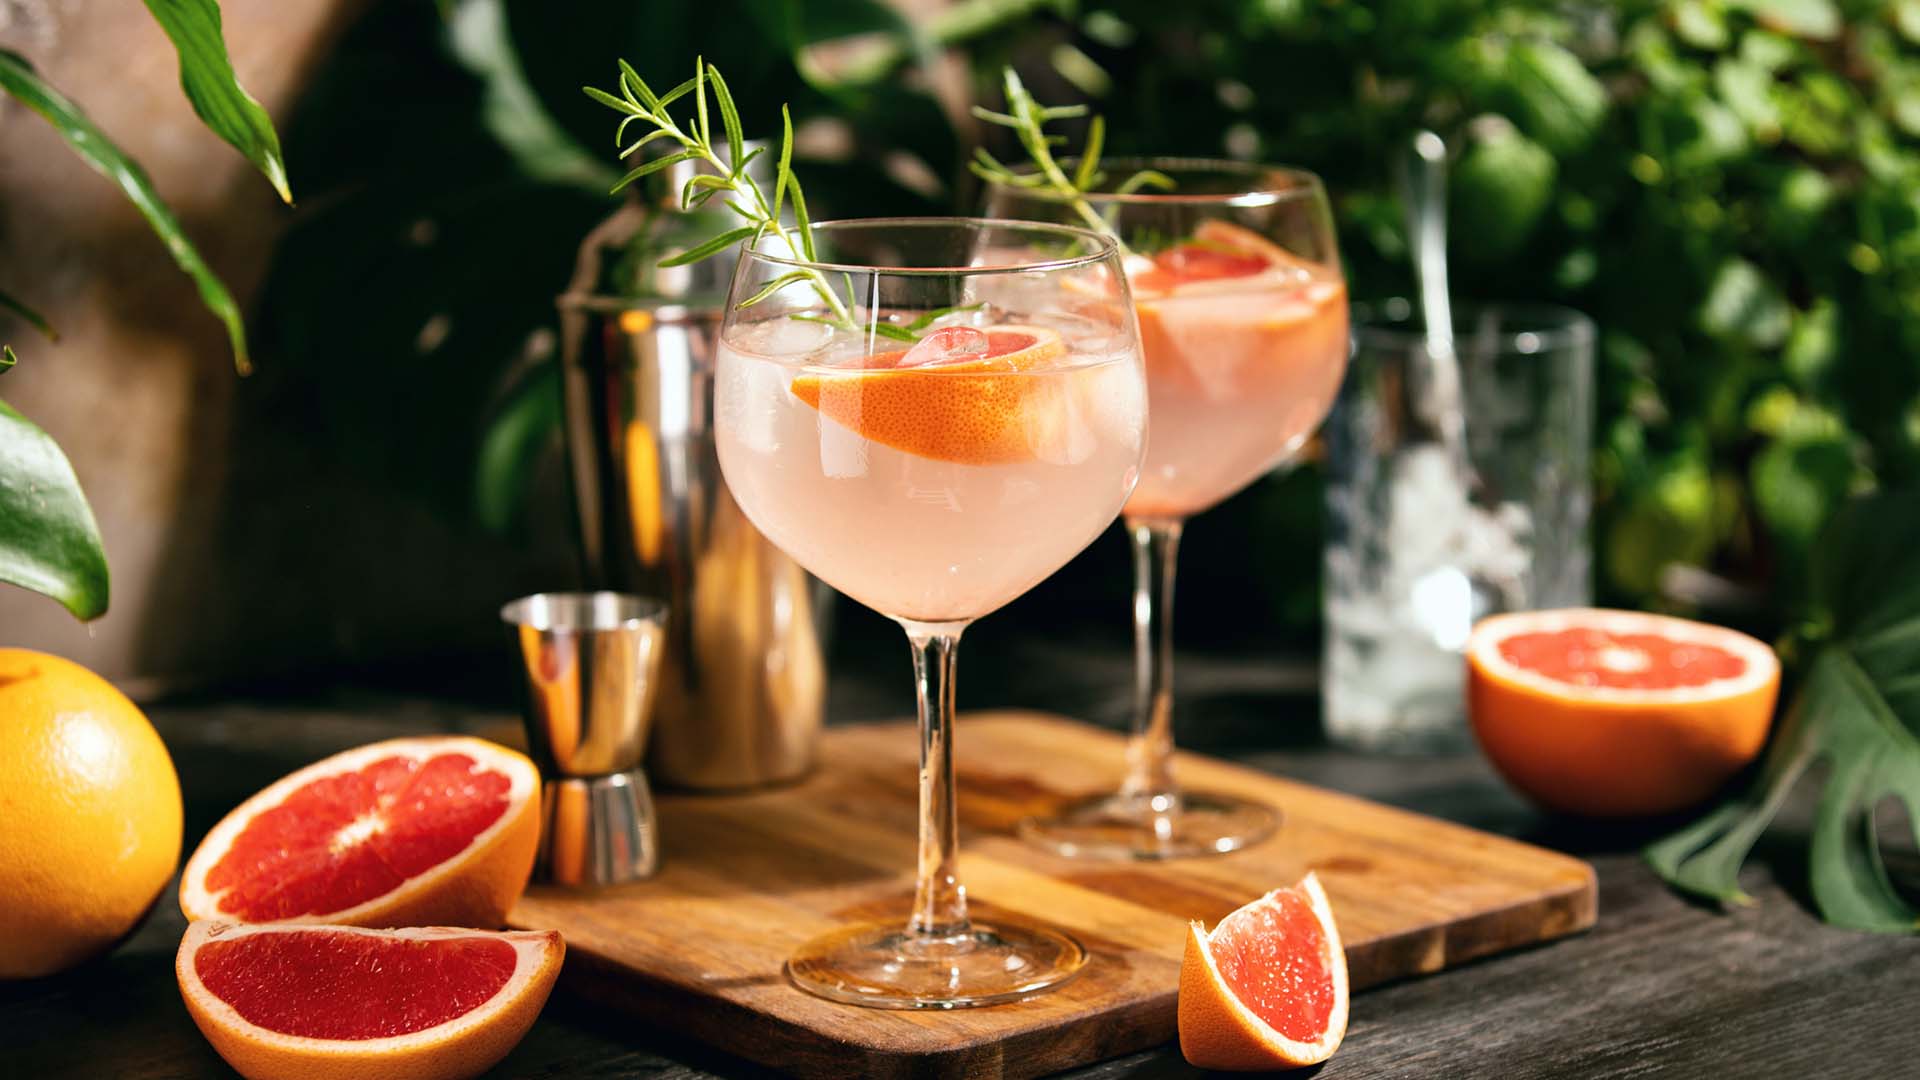 A beautiful pink cocktail is served in a coupe glass with a rosemary garnish